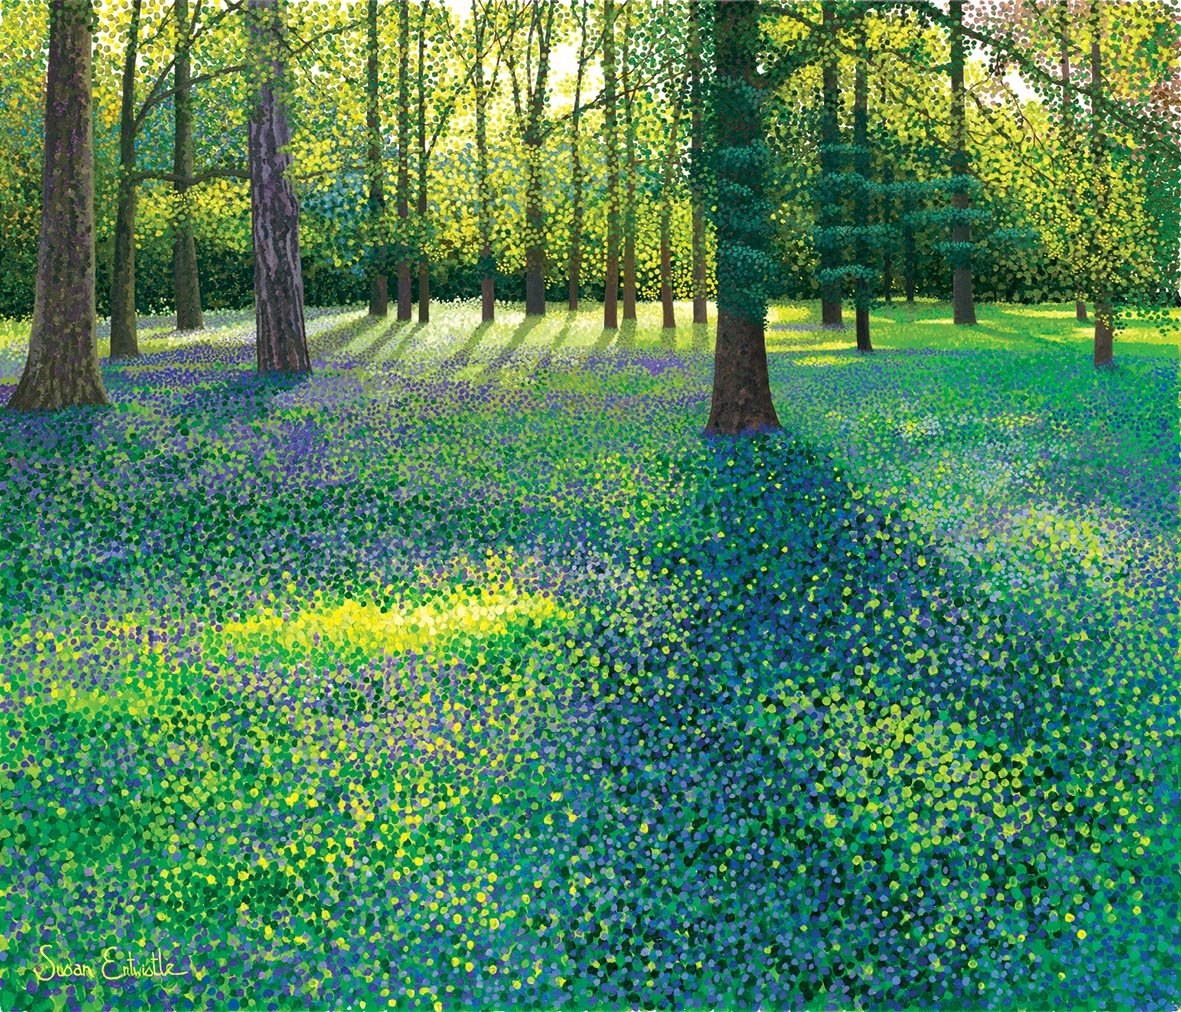 'Bluebells at Wisley' by contemporary UK painter Susan Entwistle #womensart